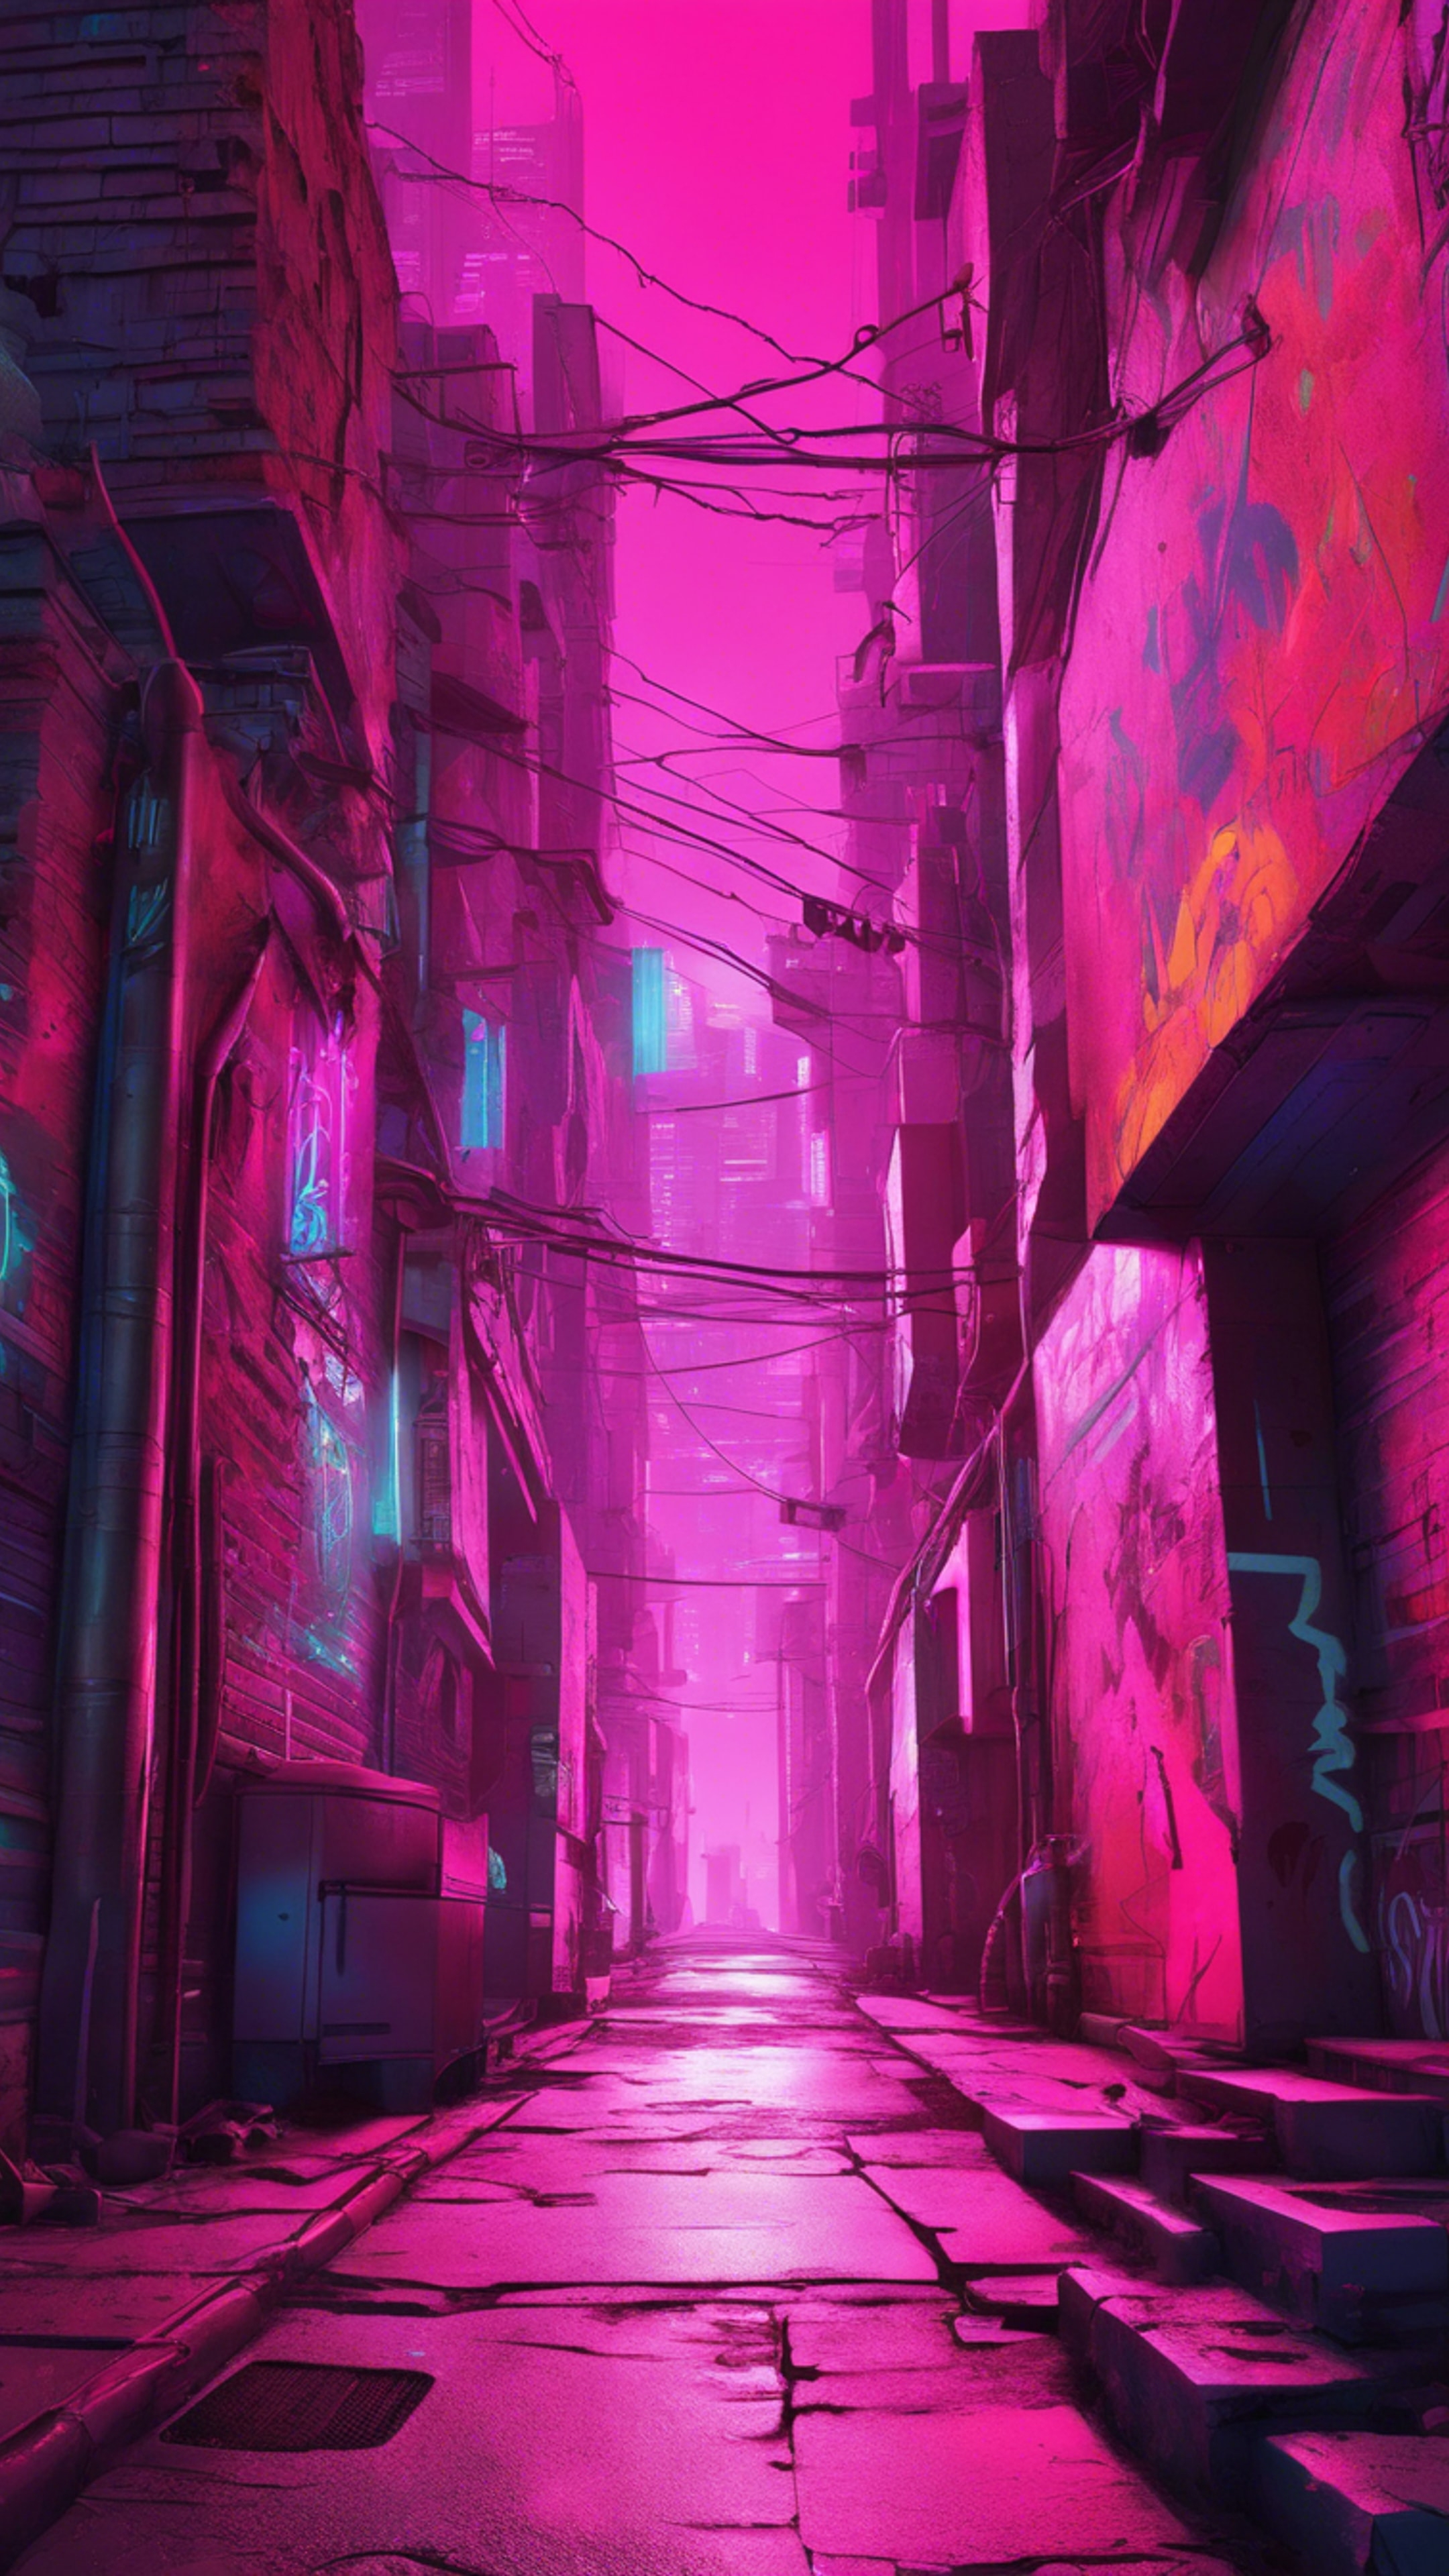 A neon-lit city alley at midnight, with bright pink graffiti on the walls, radiating a cyberpunk aura. Wallpaper[6a5b63b1eaec4ac98291]